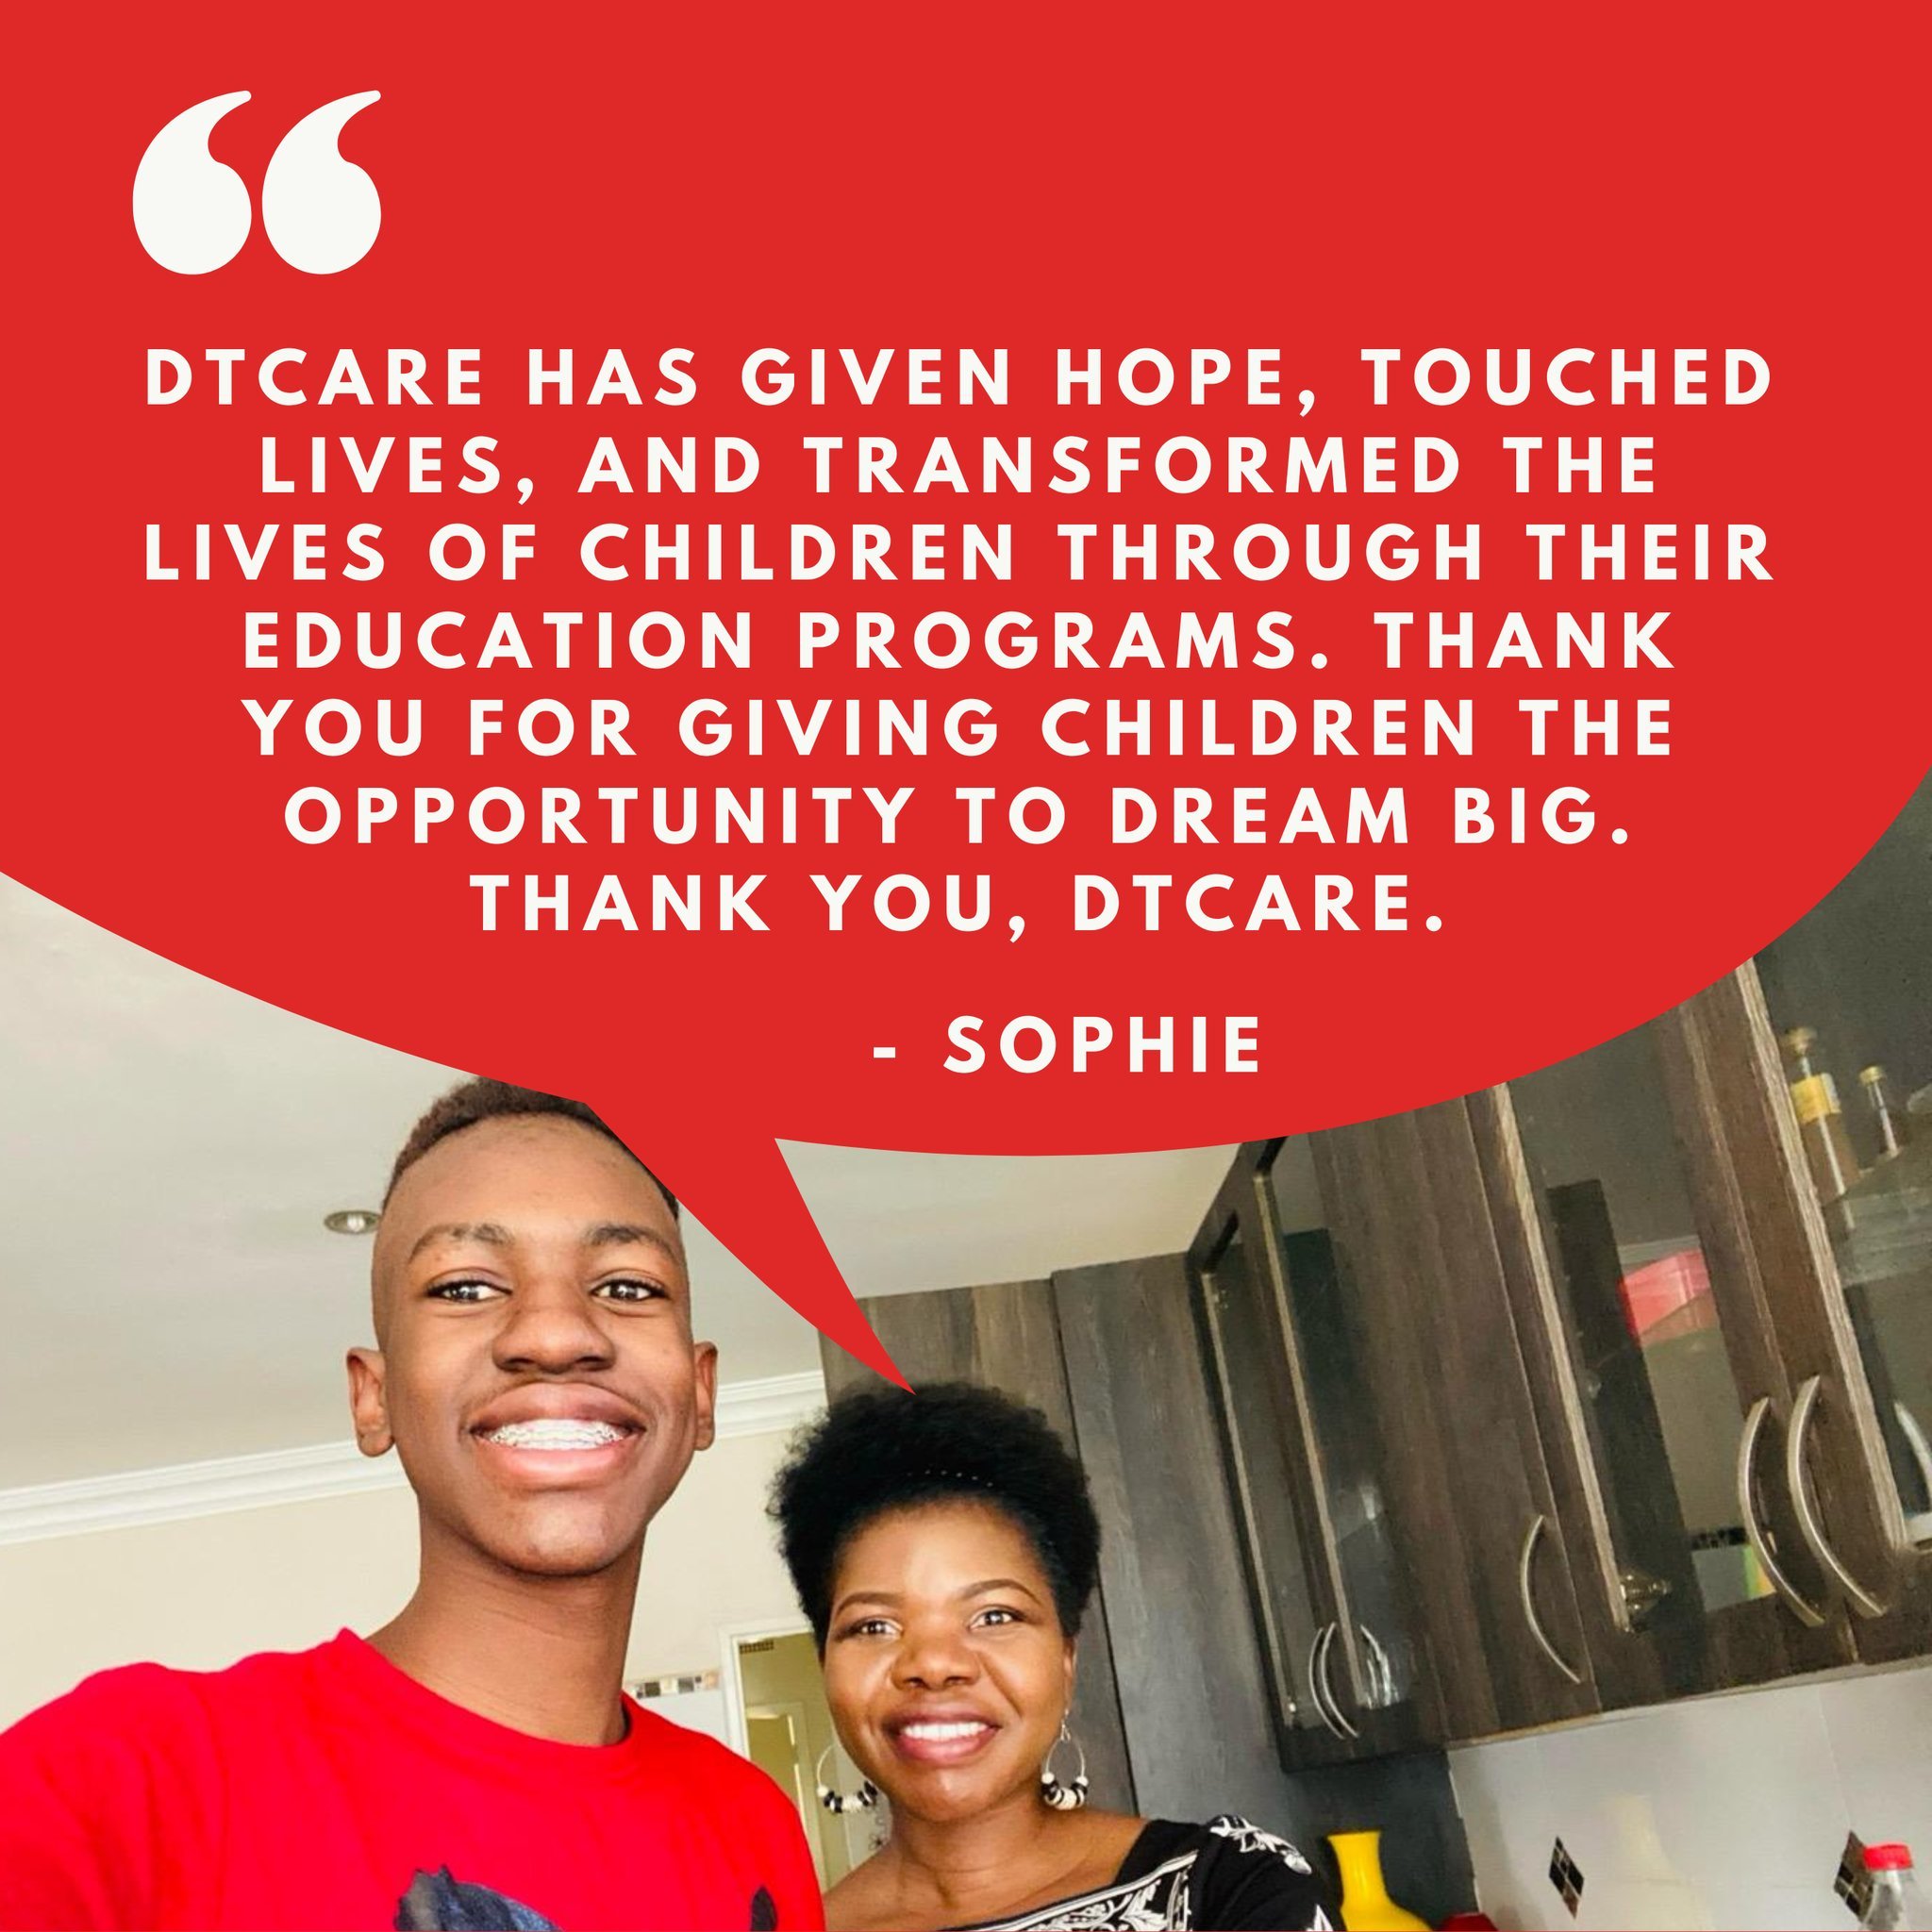 &quot;Thank you for giving children the opportunity to dream big.&quot; &ndash; Sophie, Michael's mom

We are honored to have Michael as part of DTCare's youth education sponsorship program. Michael's unwavering dedication to his academics has made h